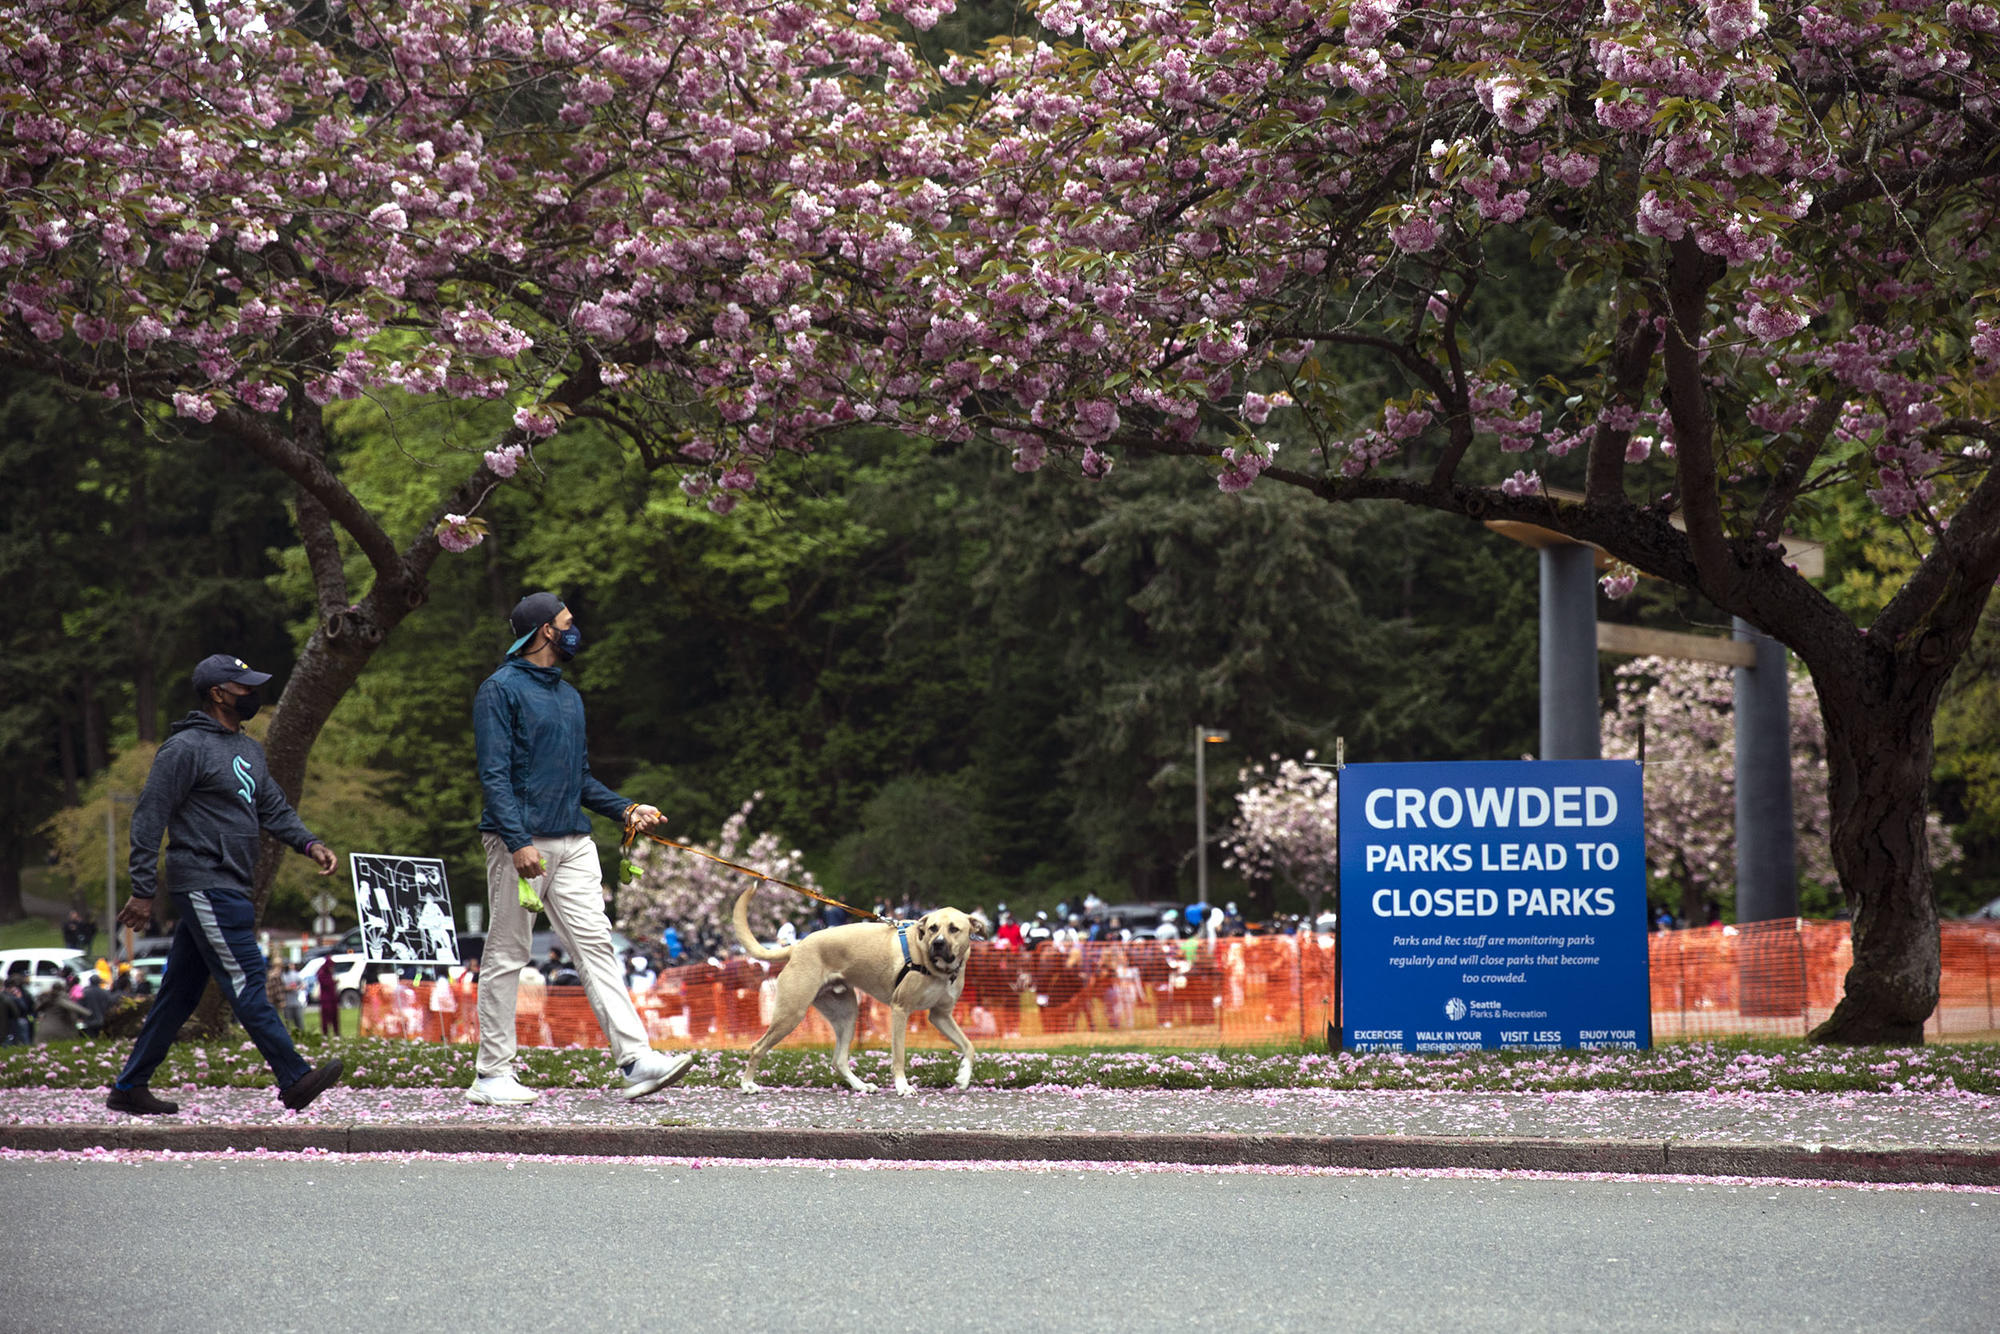 park goers walk by a sign that says "crowded parks lead to closed parks"